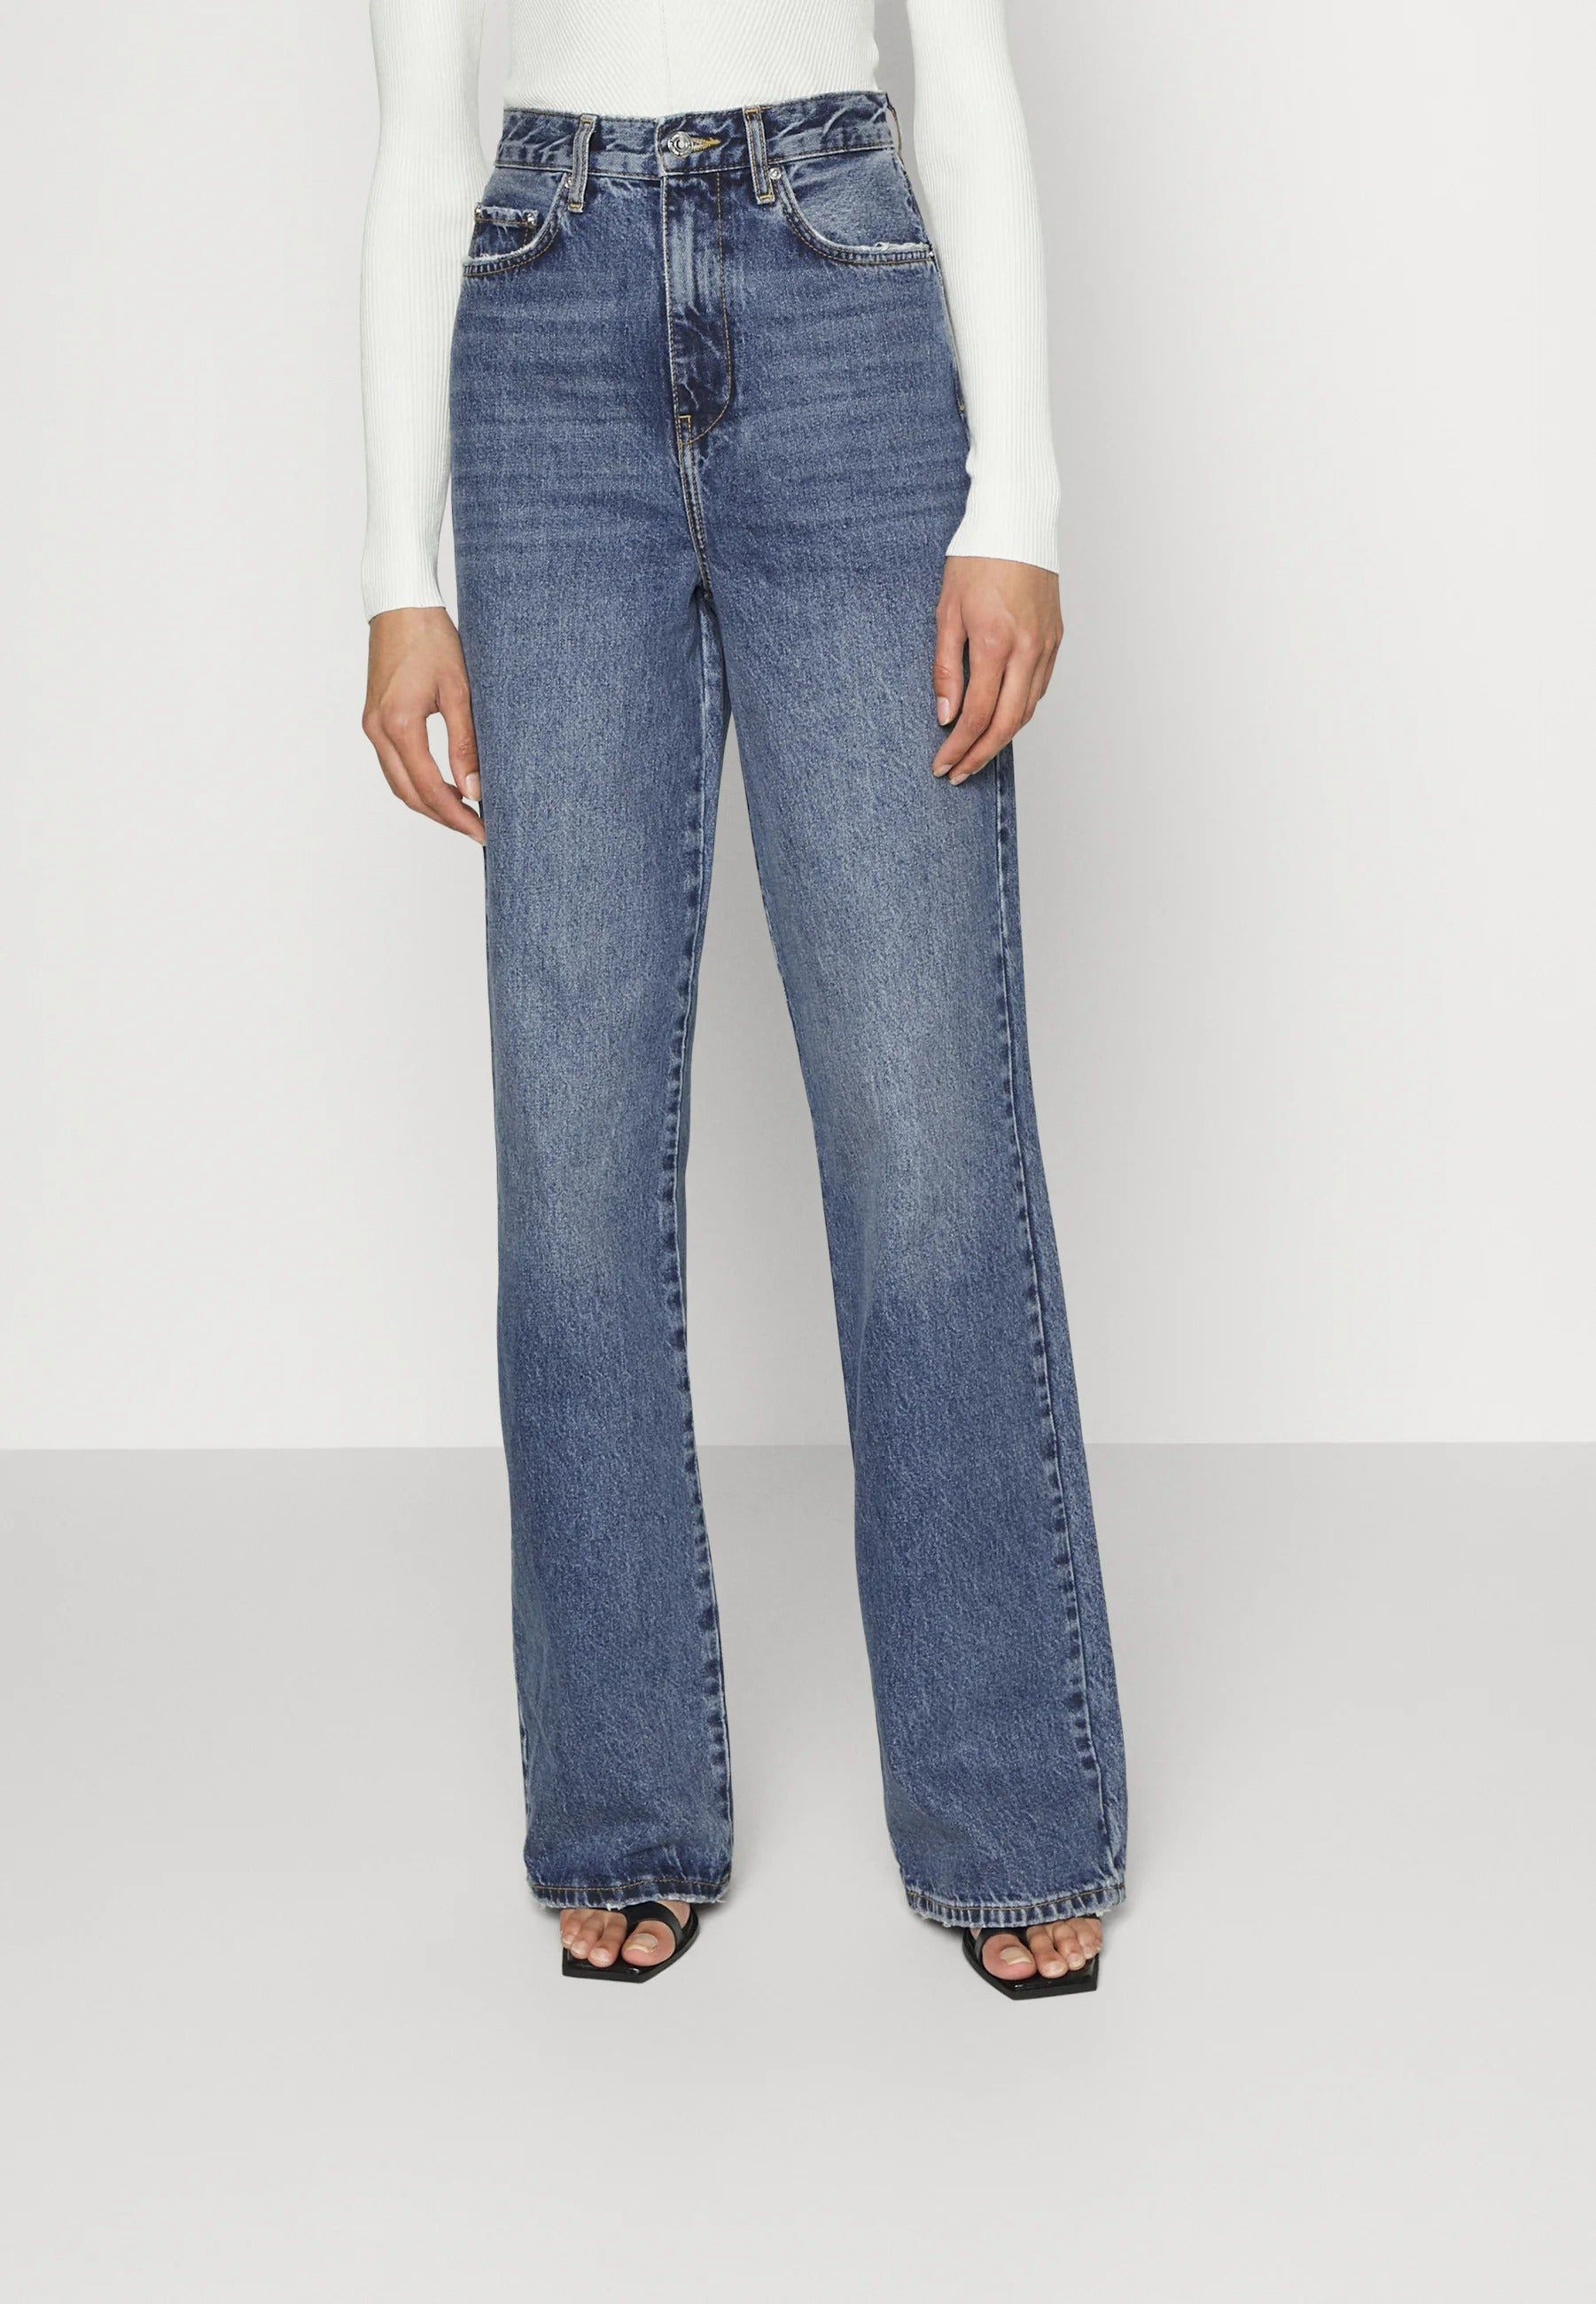 Vero Moda + Relaxed fit jeans